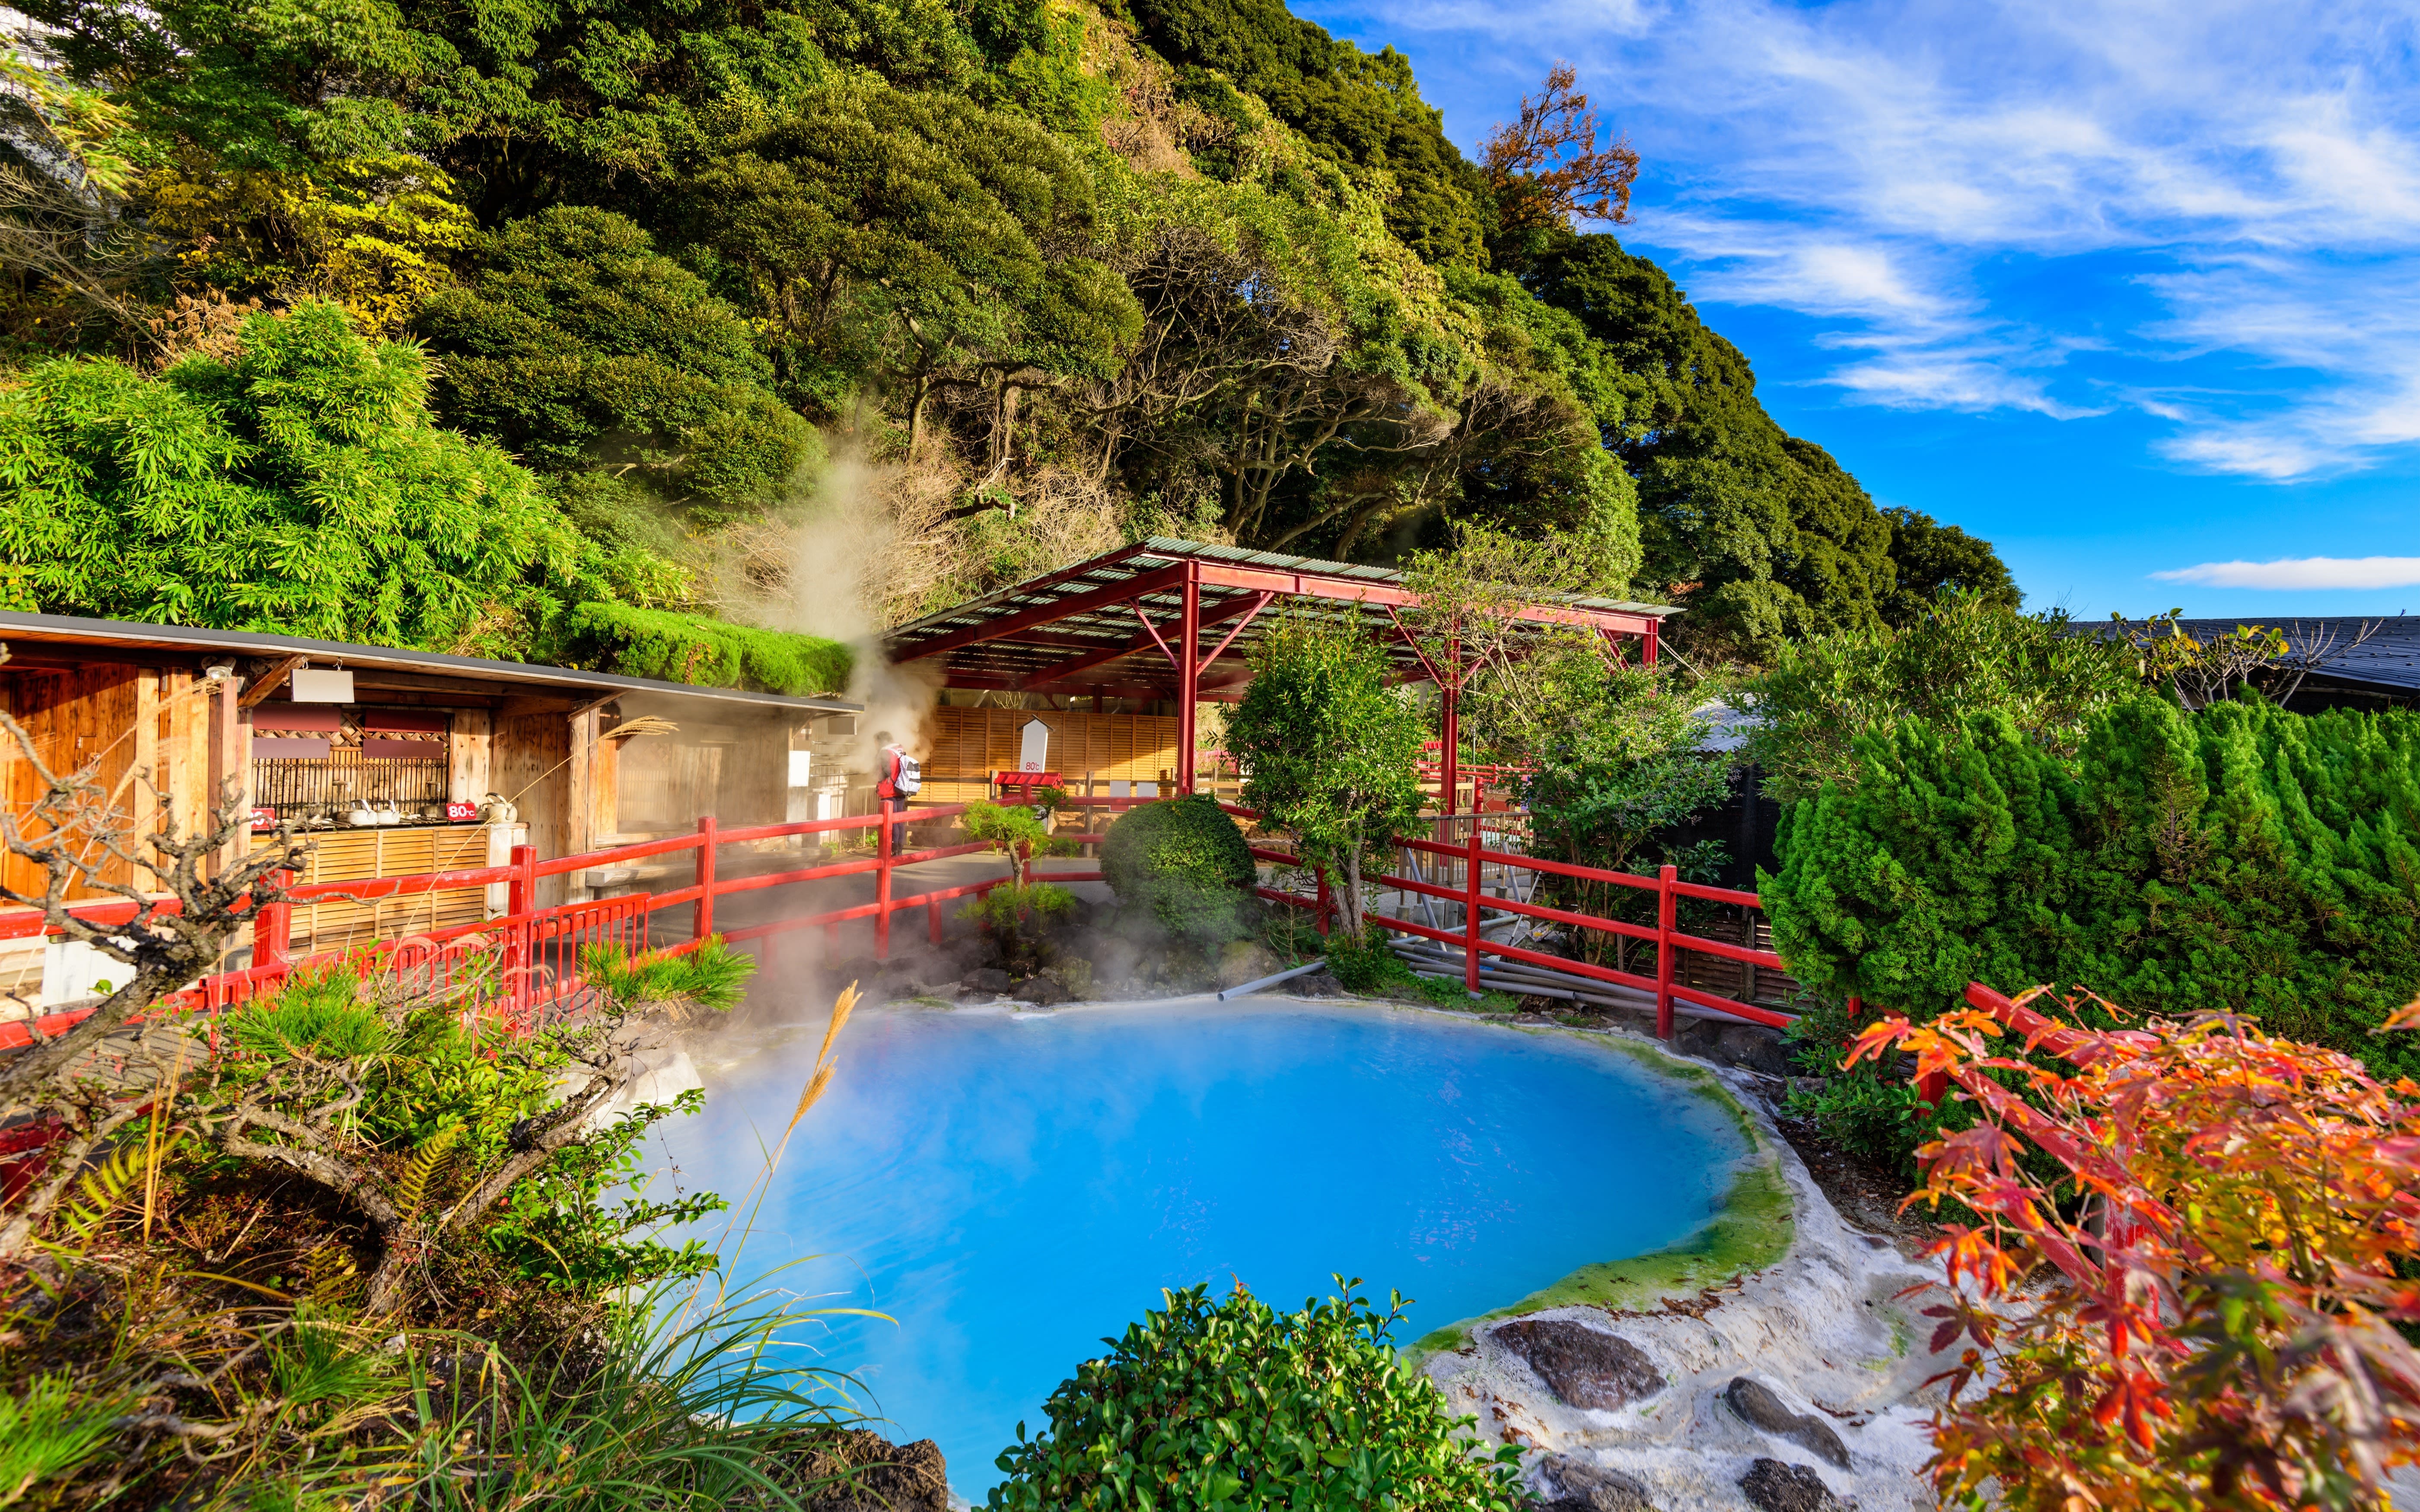 An image of a hot spring in Beppu, Japan